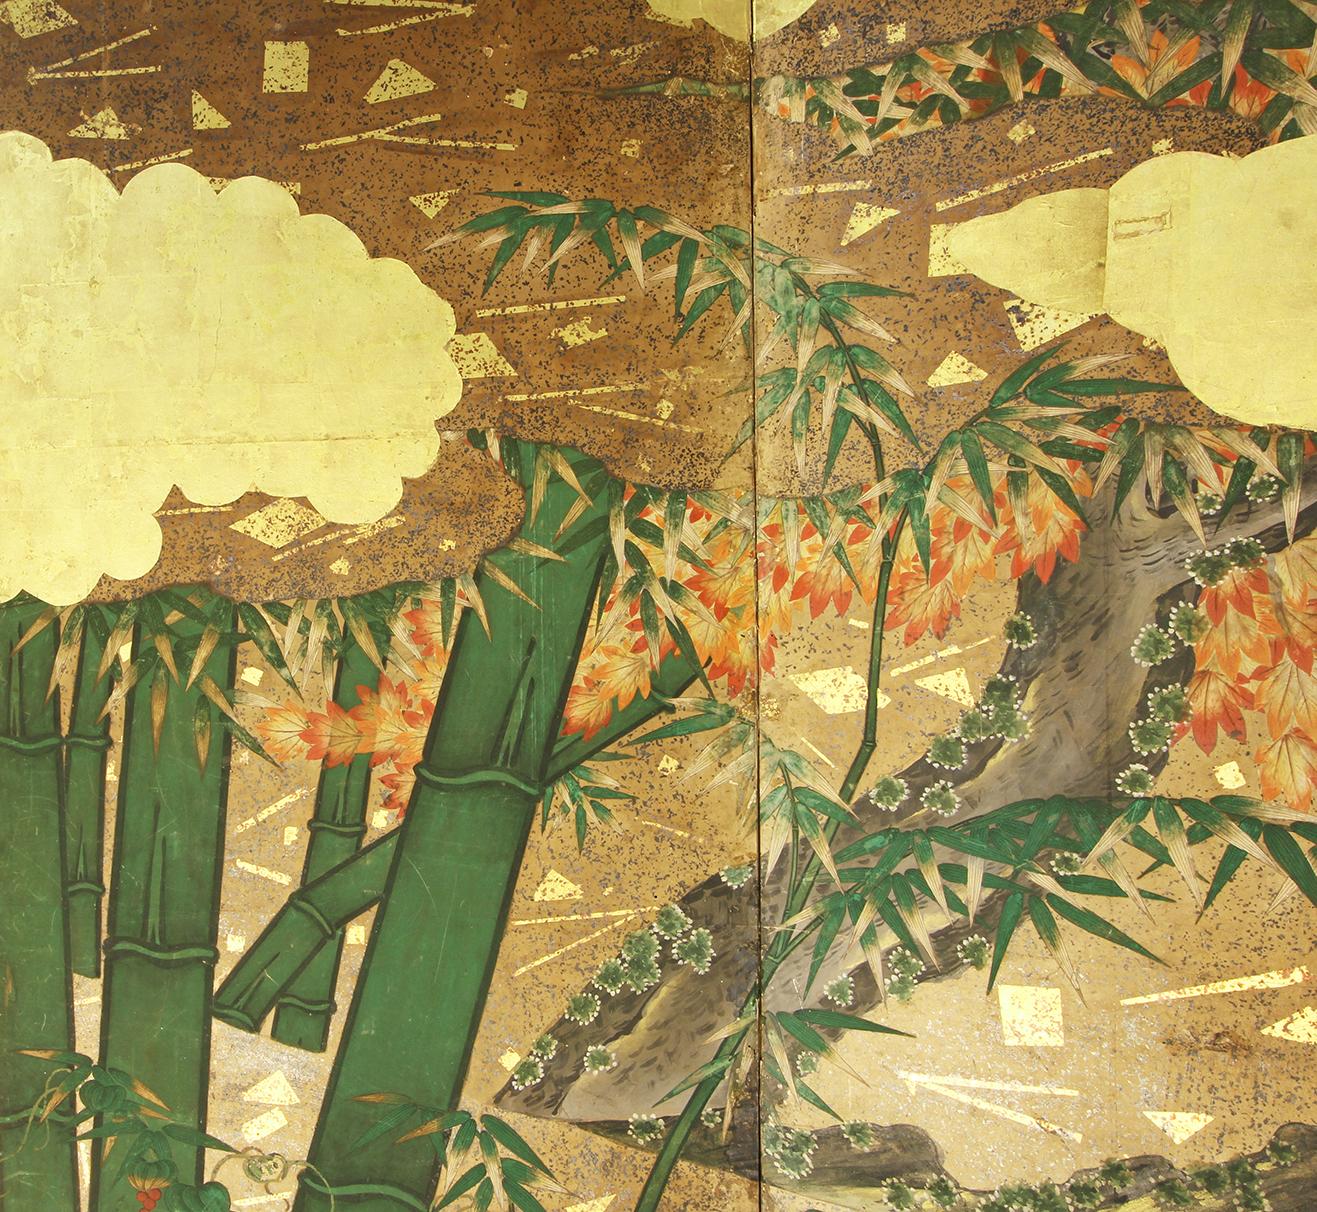 Landscape with Flowers and Bamboo by an 18th century painter of the Rinpa school, two panels painted in ink on gold leaf and vegetable paper.
The flowers are painted with great care with mineral pigments and inky inks.
Rinpa is one of the major